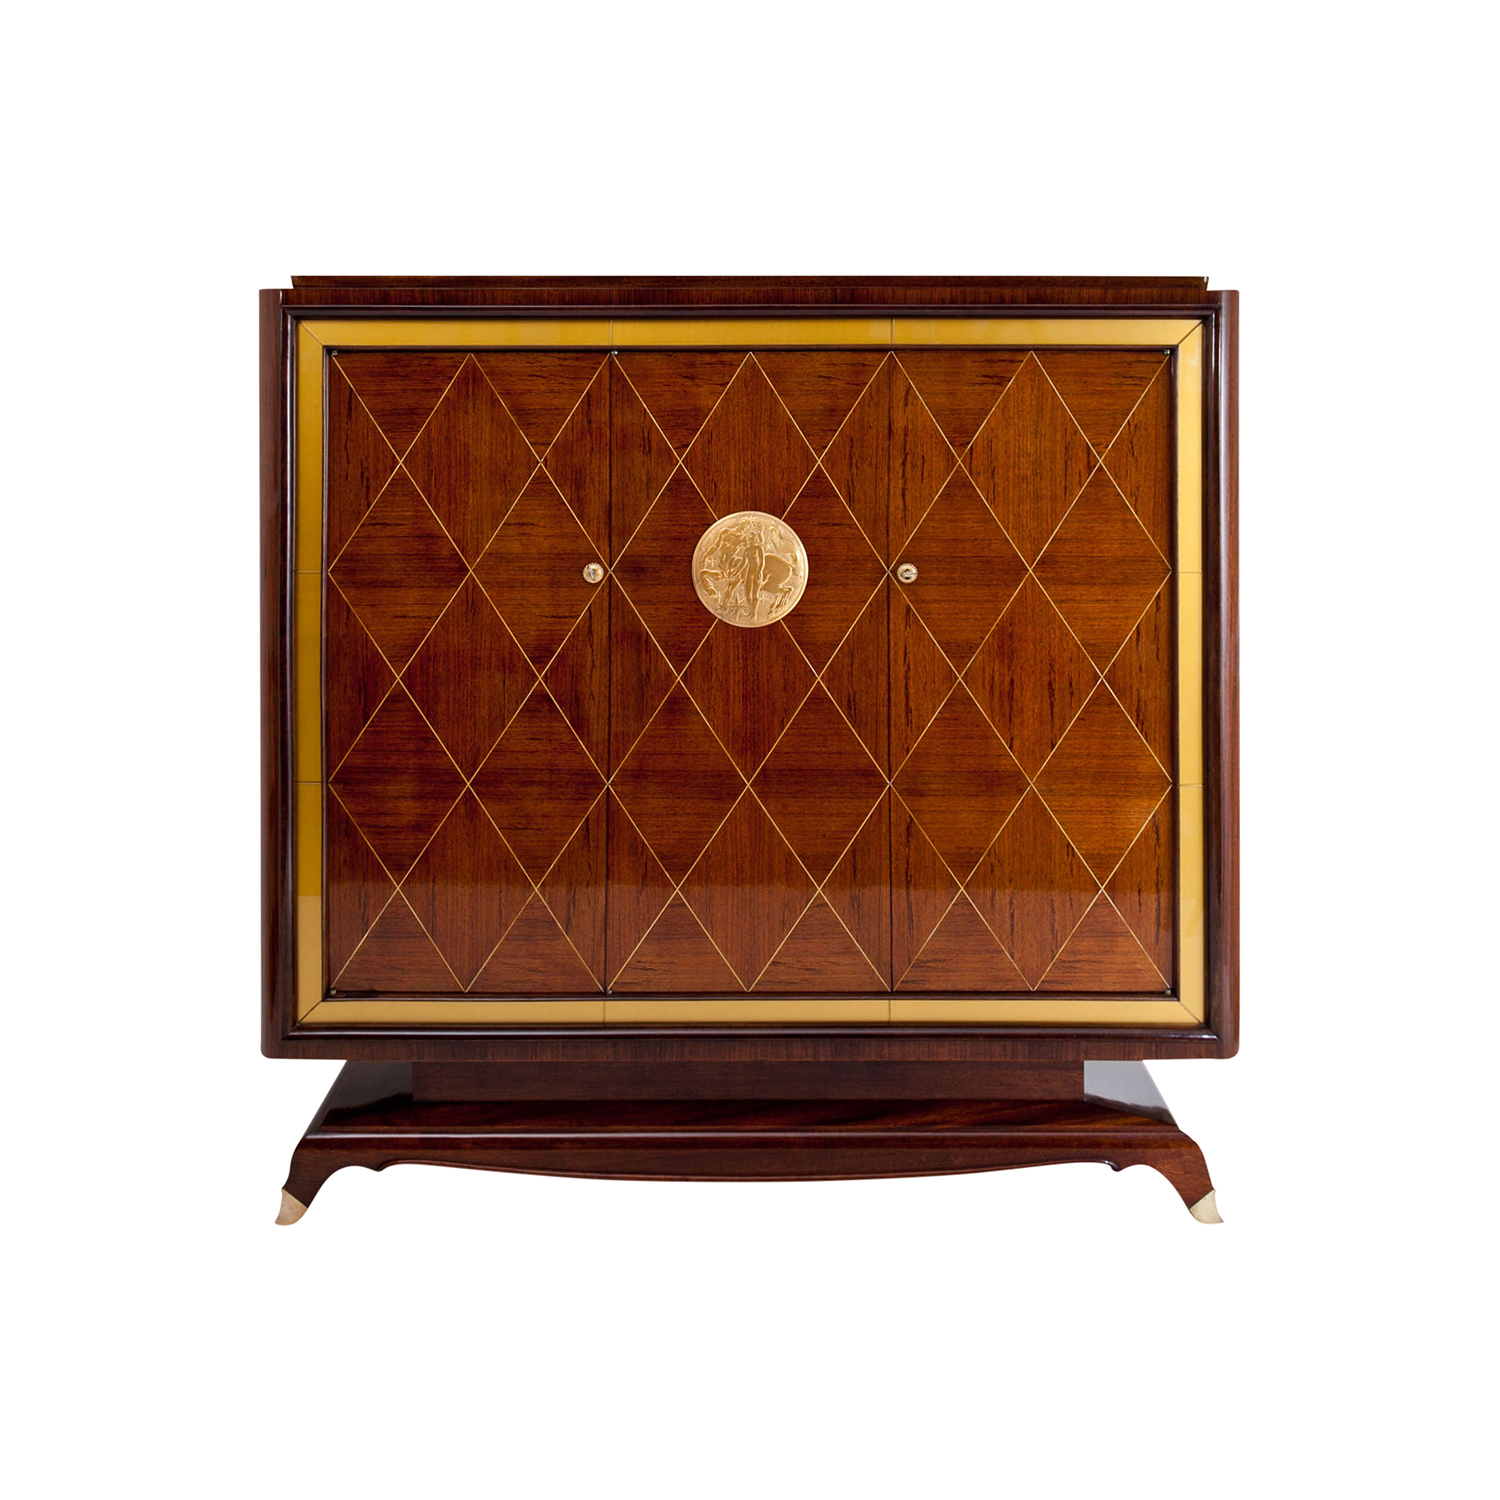 1940s French Art Deco Rambaudi-Dantoine Rosewood Cabinet by Jean Desnos